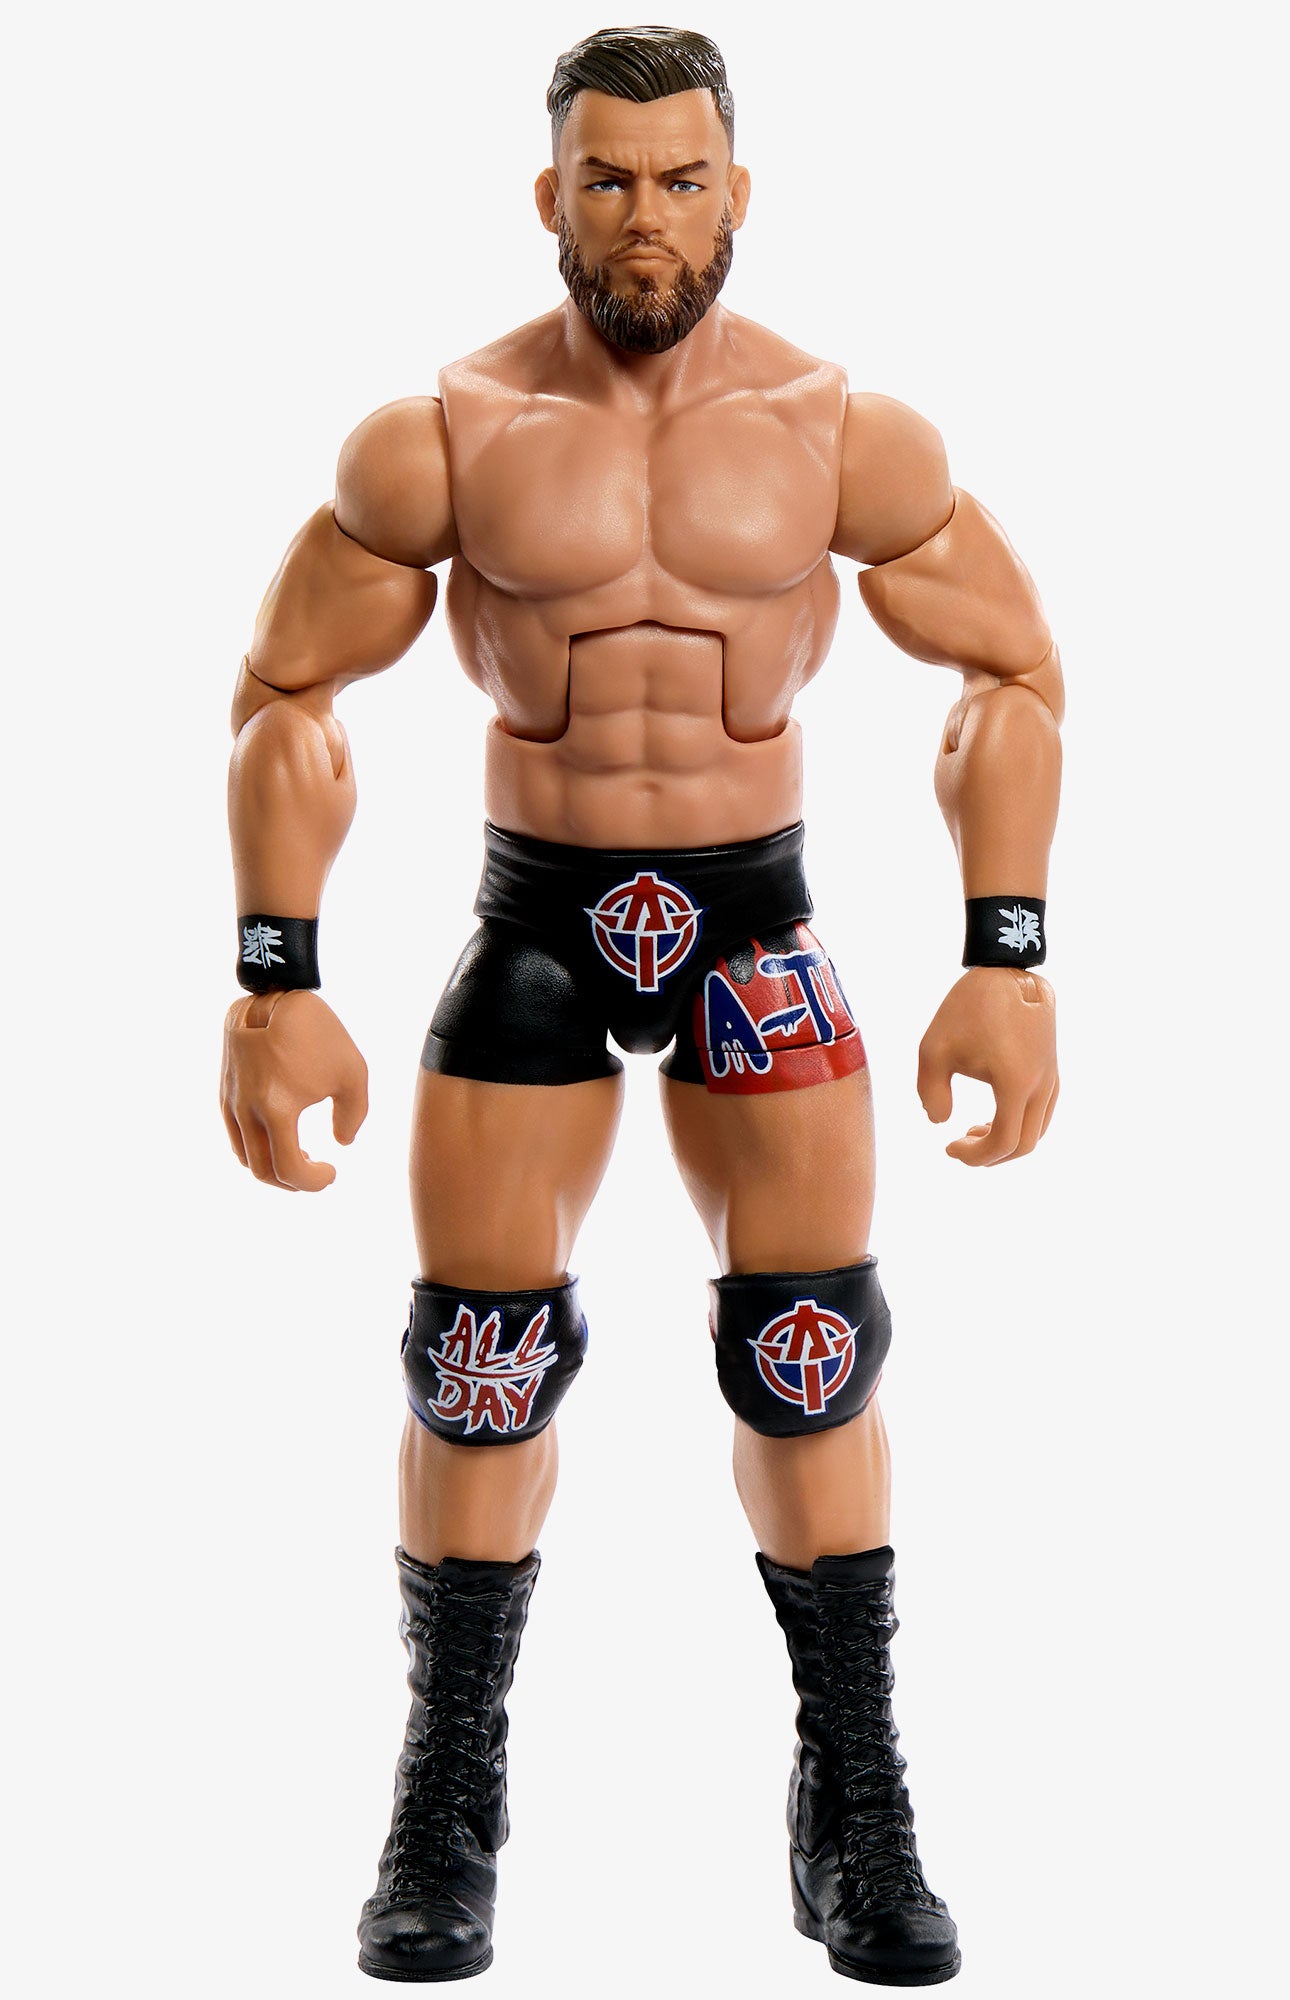 Austin Theory WWE Elite Collection Series #110